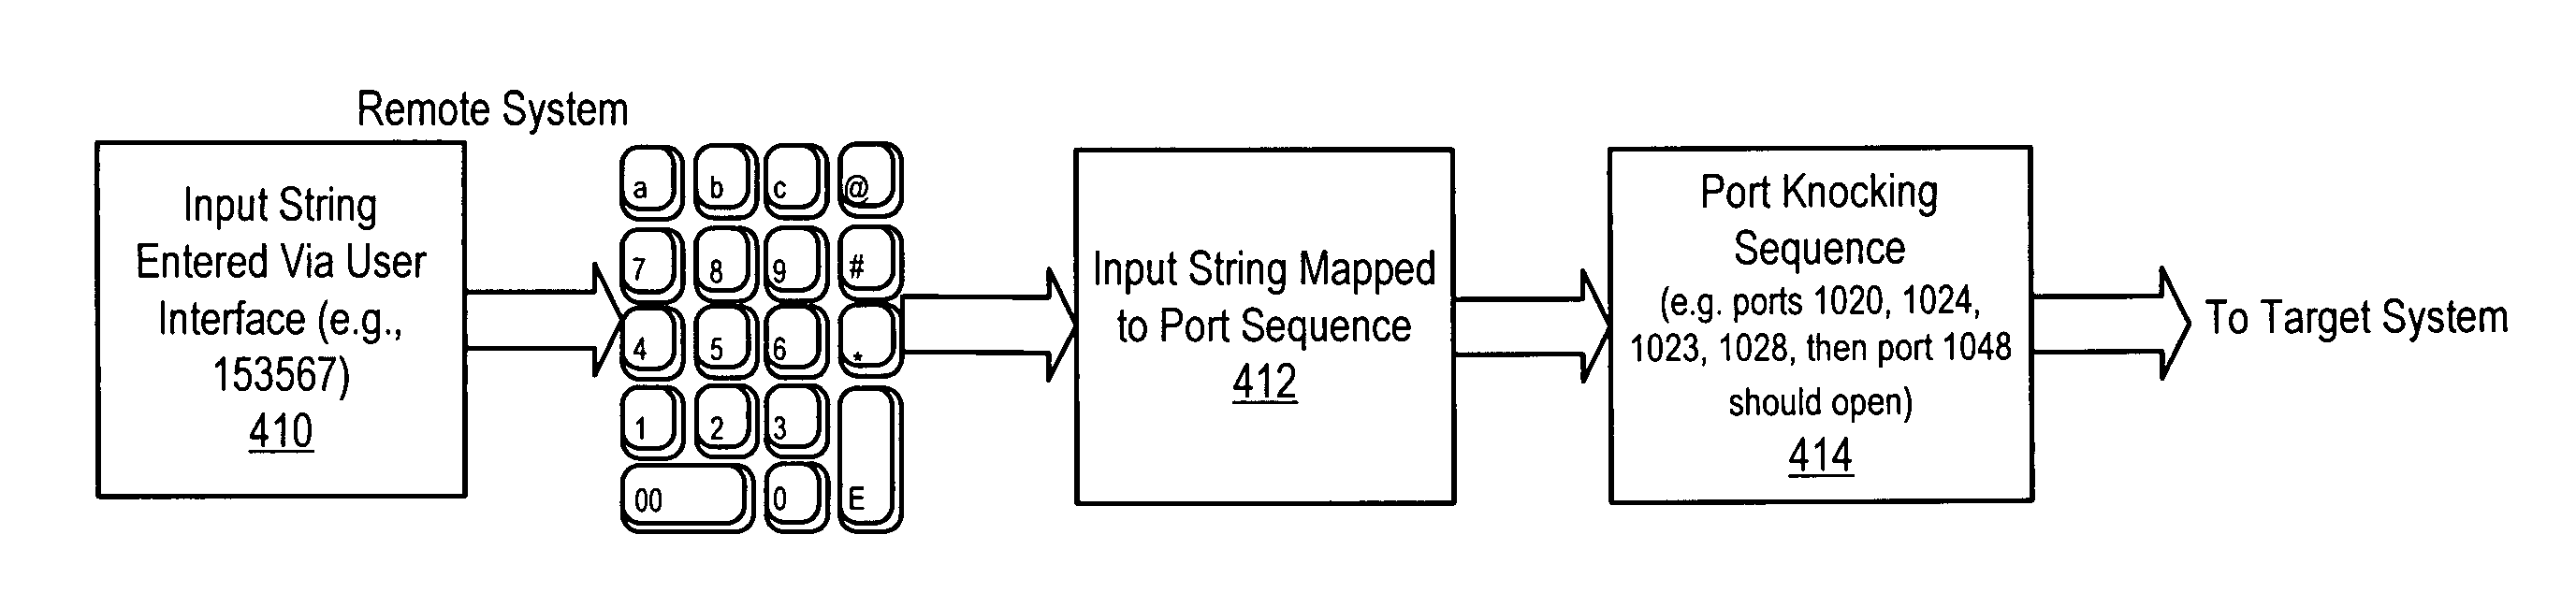 Keypad user interface and port sequence mapping algorithm